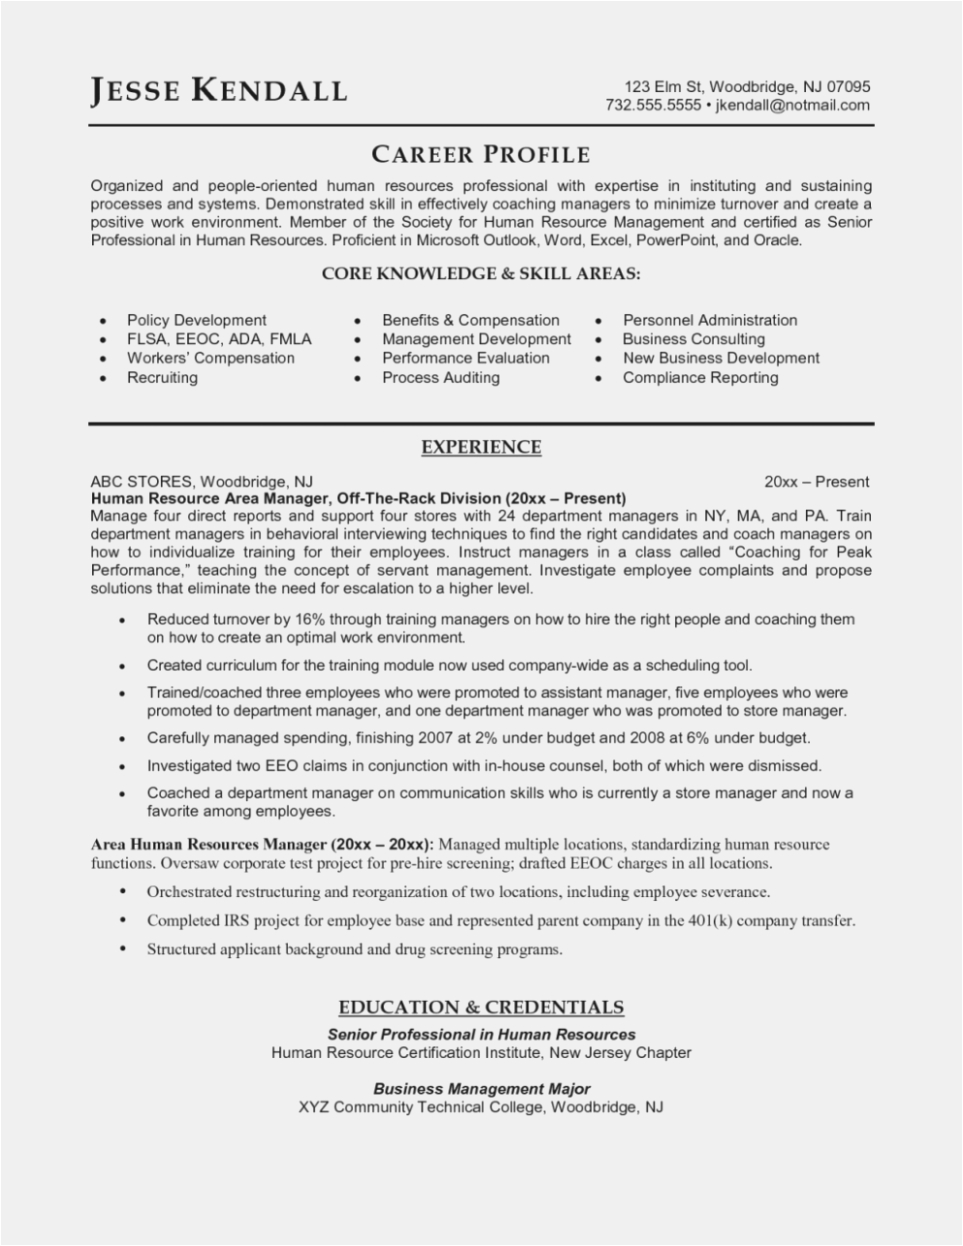 Vice President Of Human Resources Resume Sample 11 Various Ways to Do Vice President Human Resources